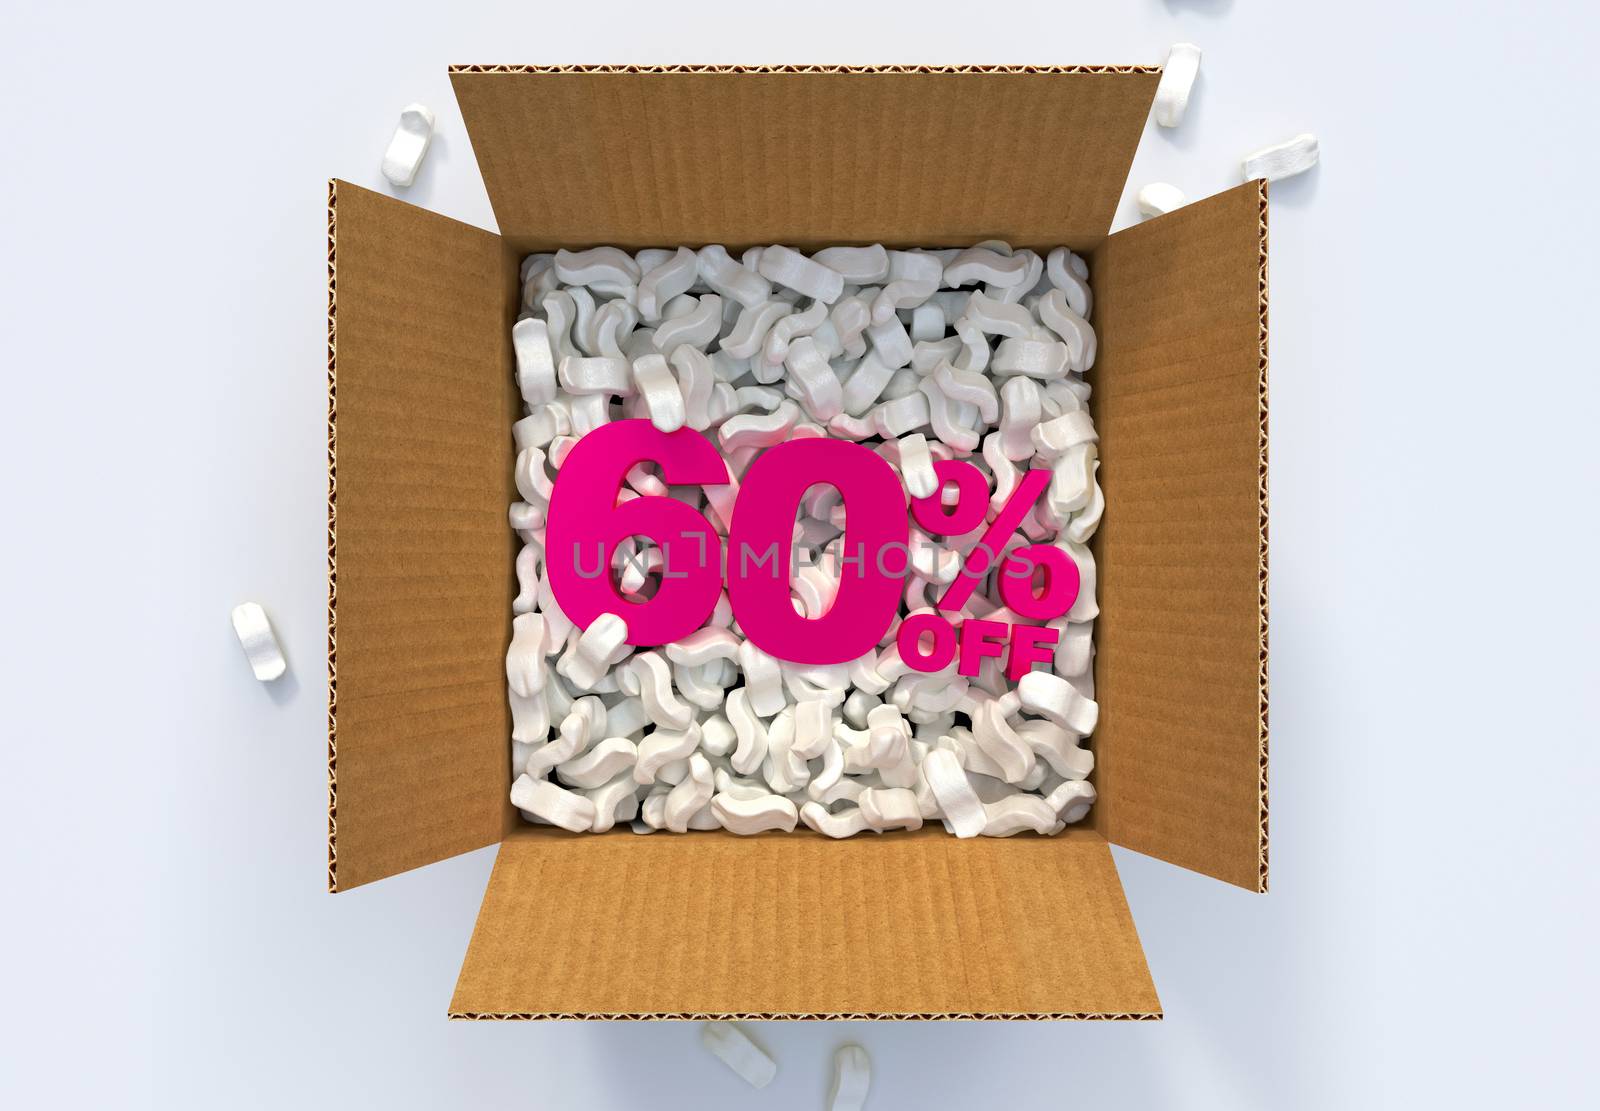 Cardboard Box with shipping peanuts and 60 percent off sign